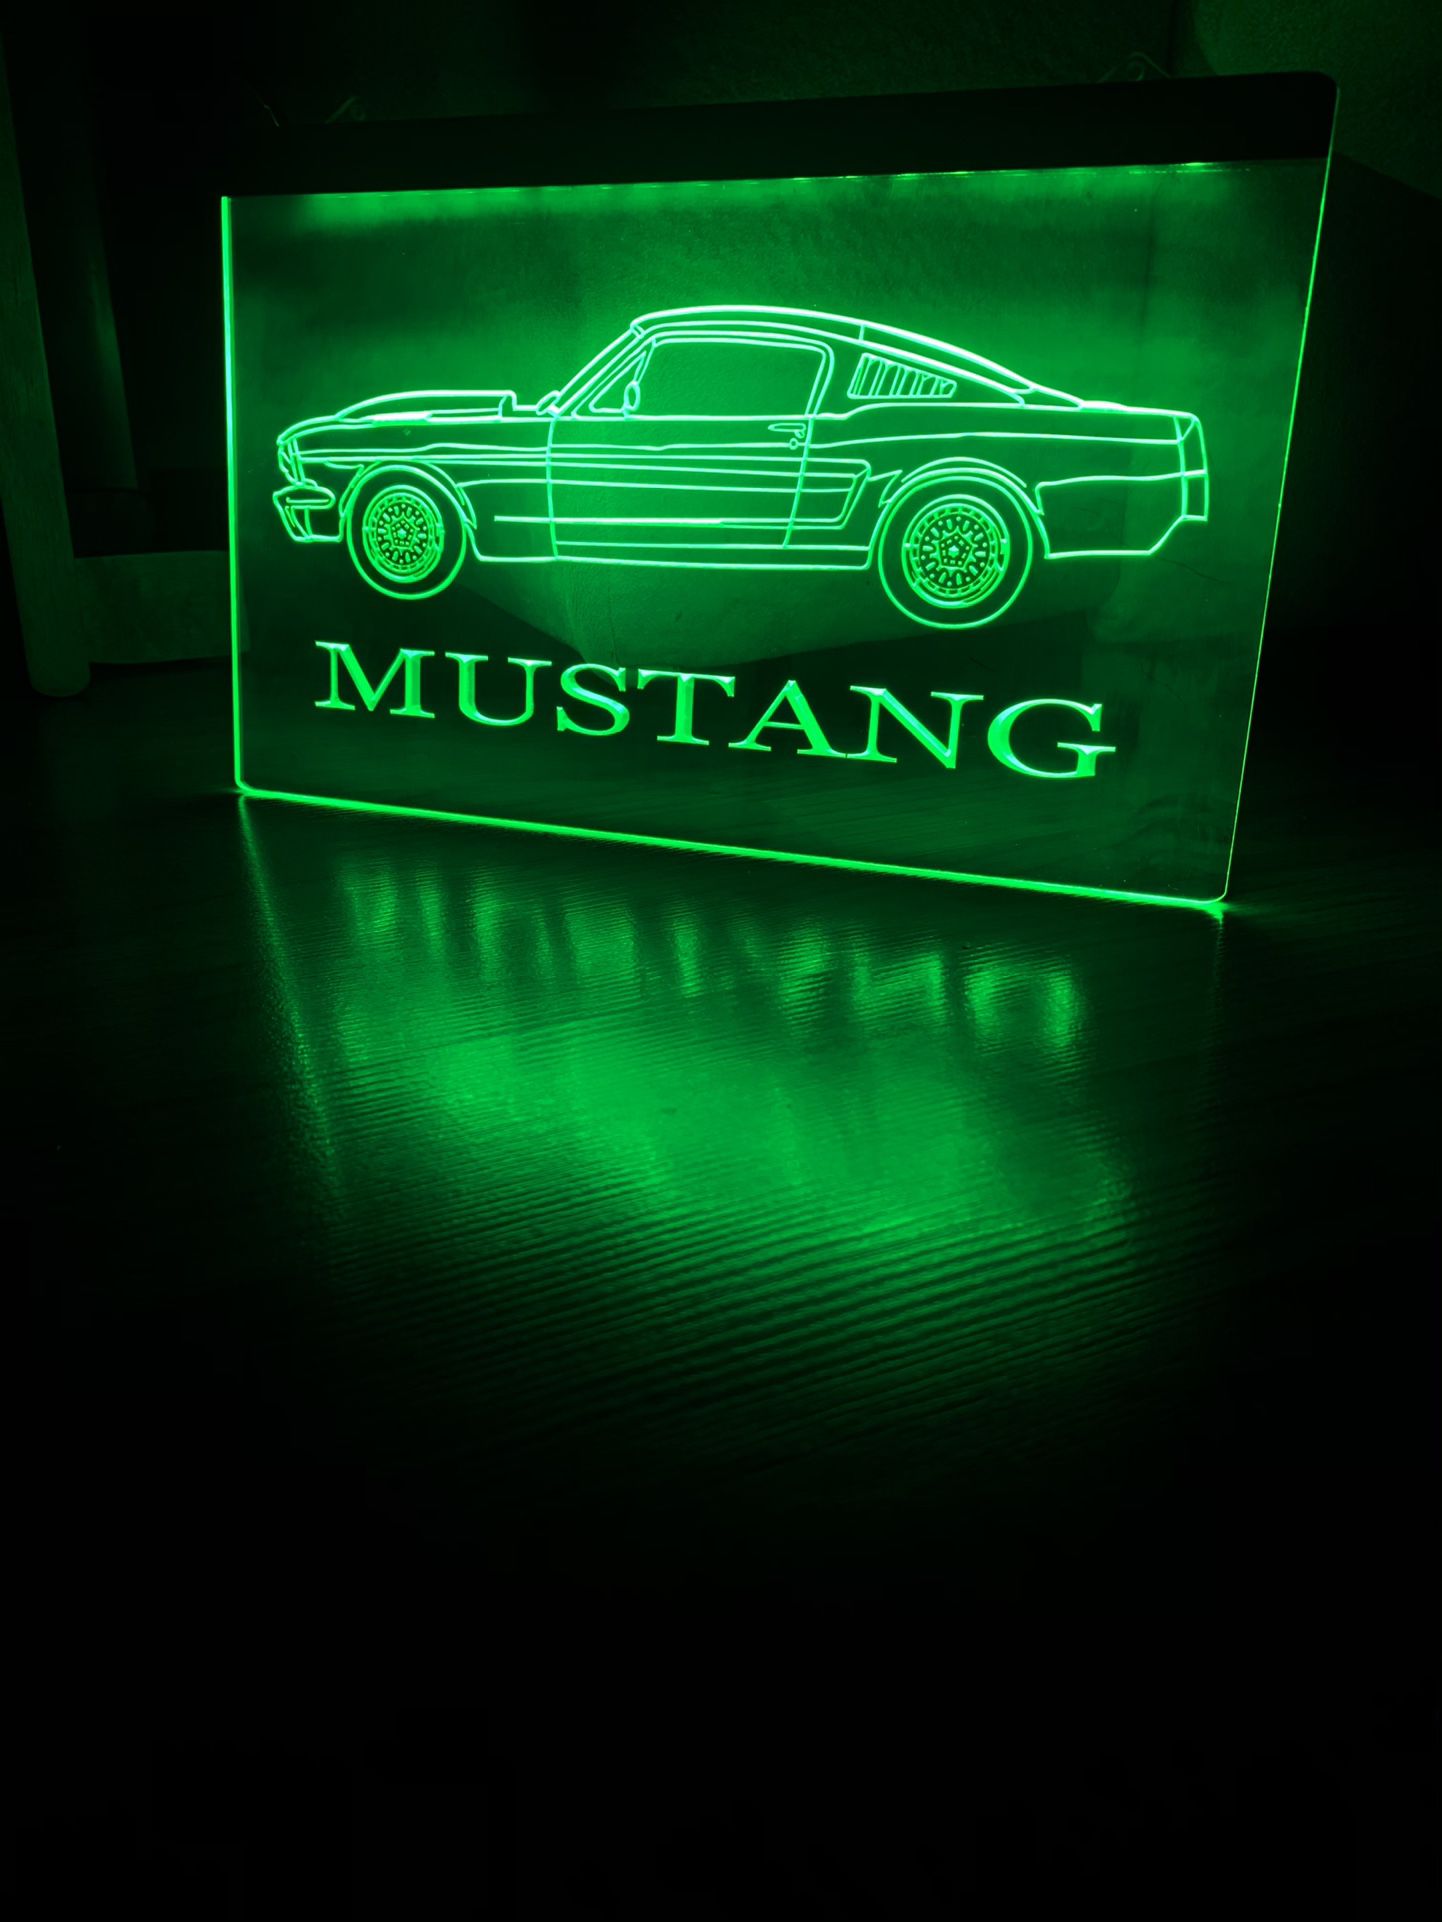 FORD MUSTANG FASTBACK LED NEON GREEN LIGHT SIGN 8x12